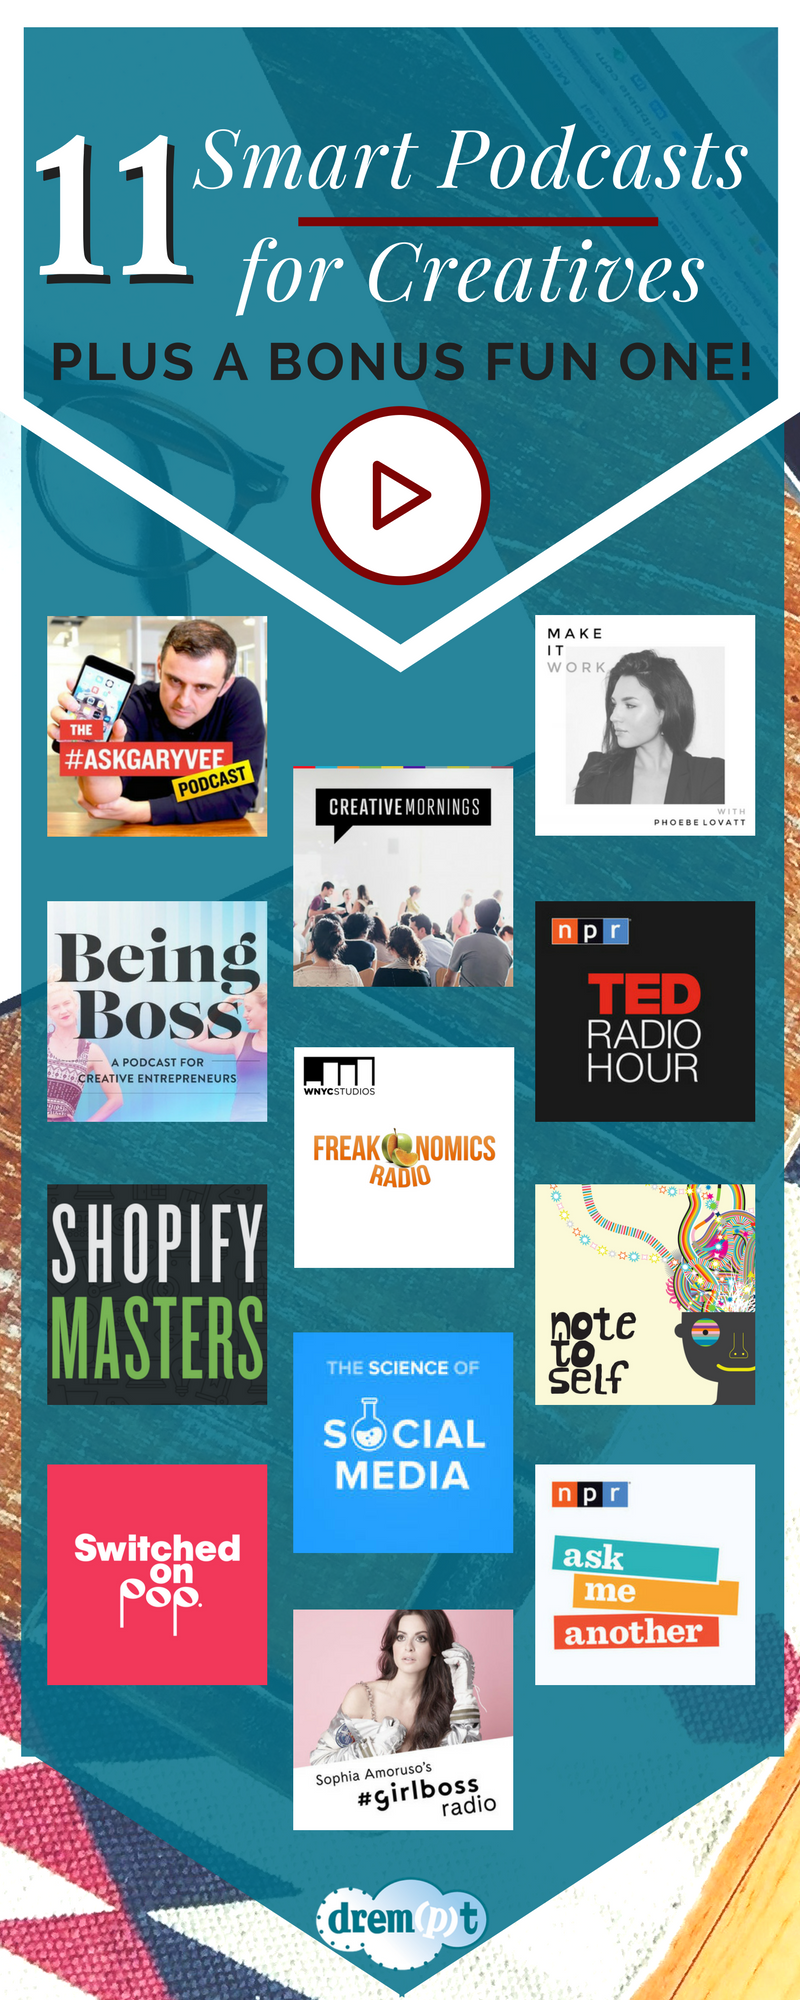 11 Smart Podcasts for Creatives, Entrepreneurs, and Small Business Owners on Drempt.com